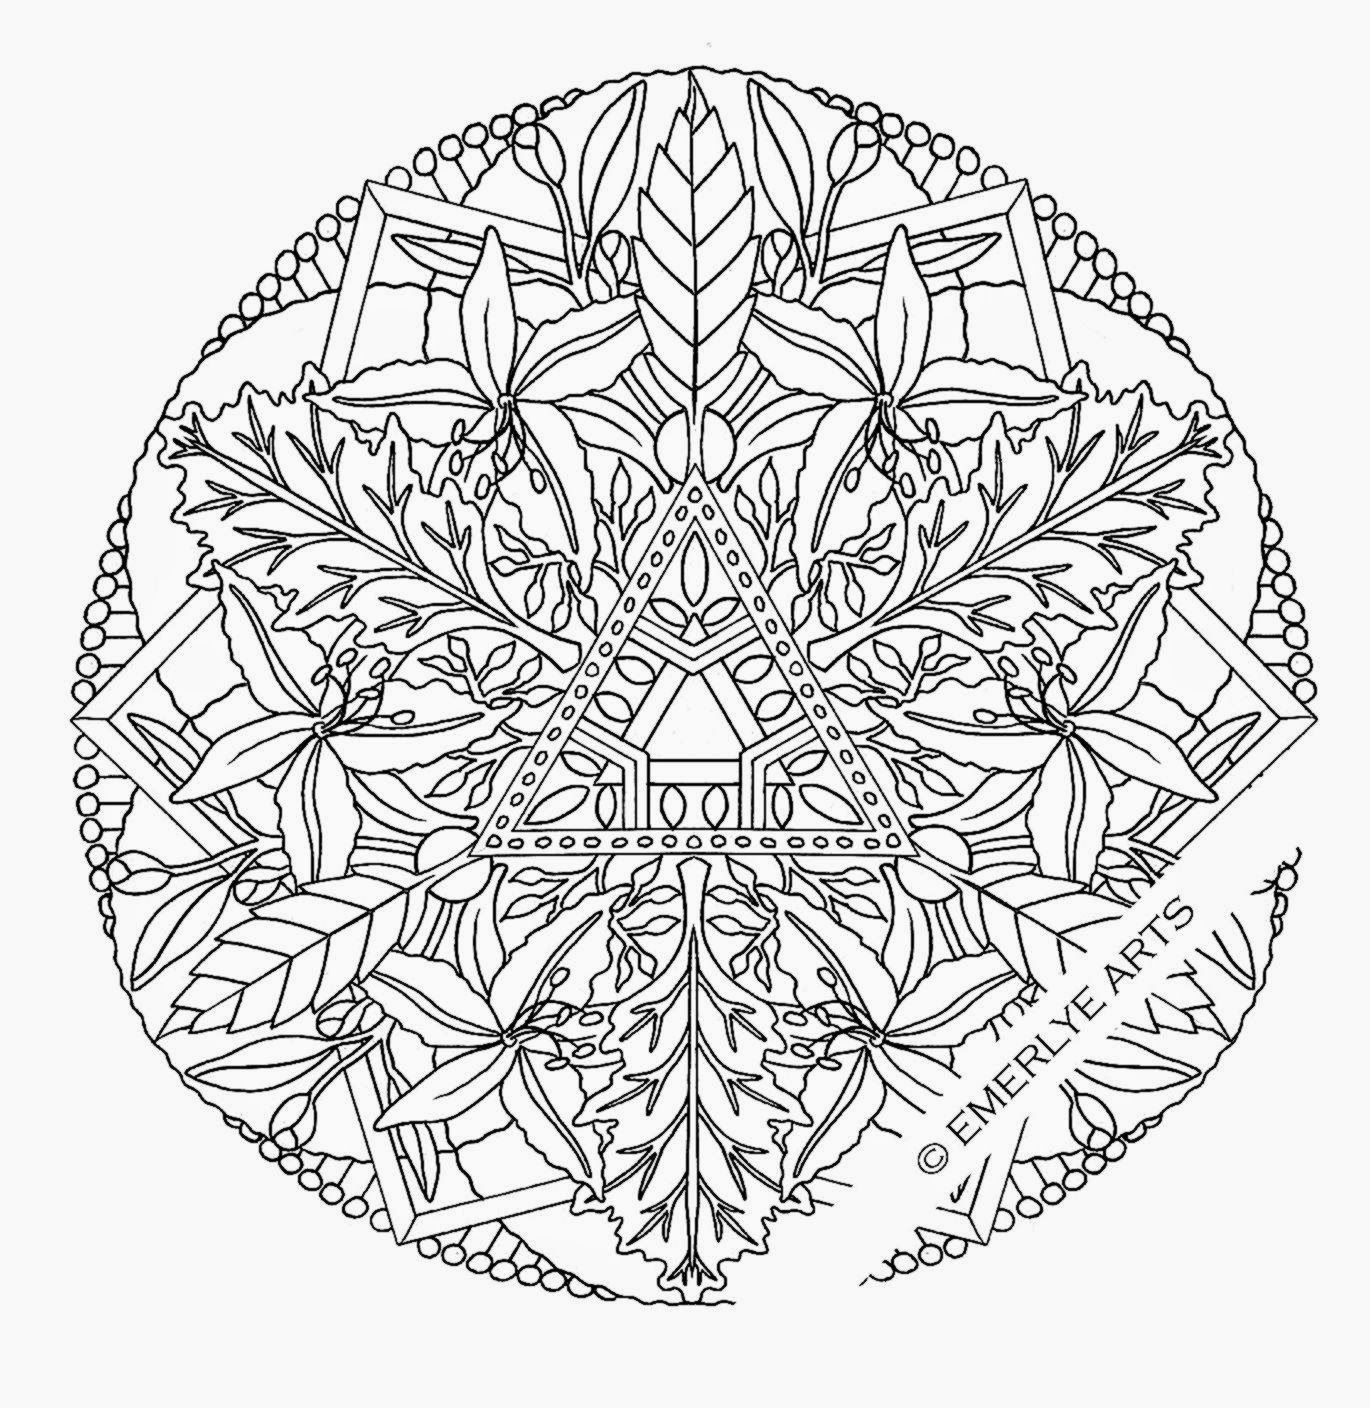 Coloring Sheets For Adults | Free Coloring Sheet